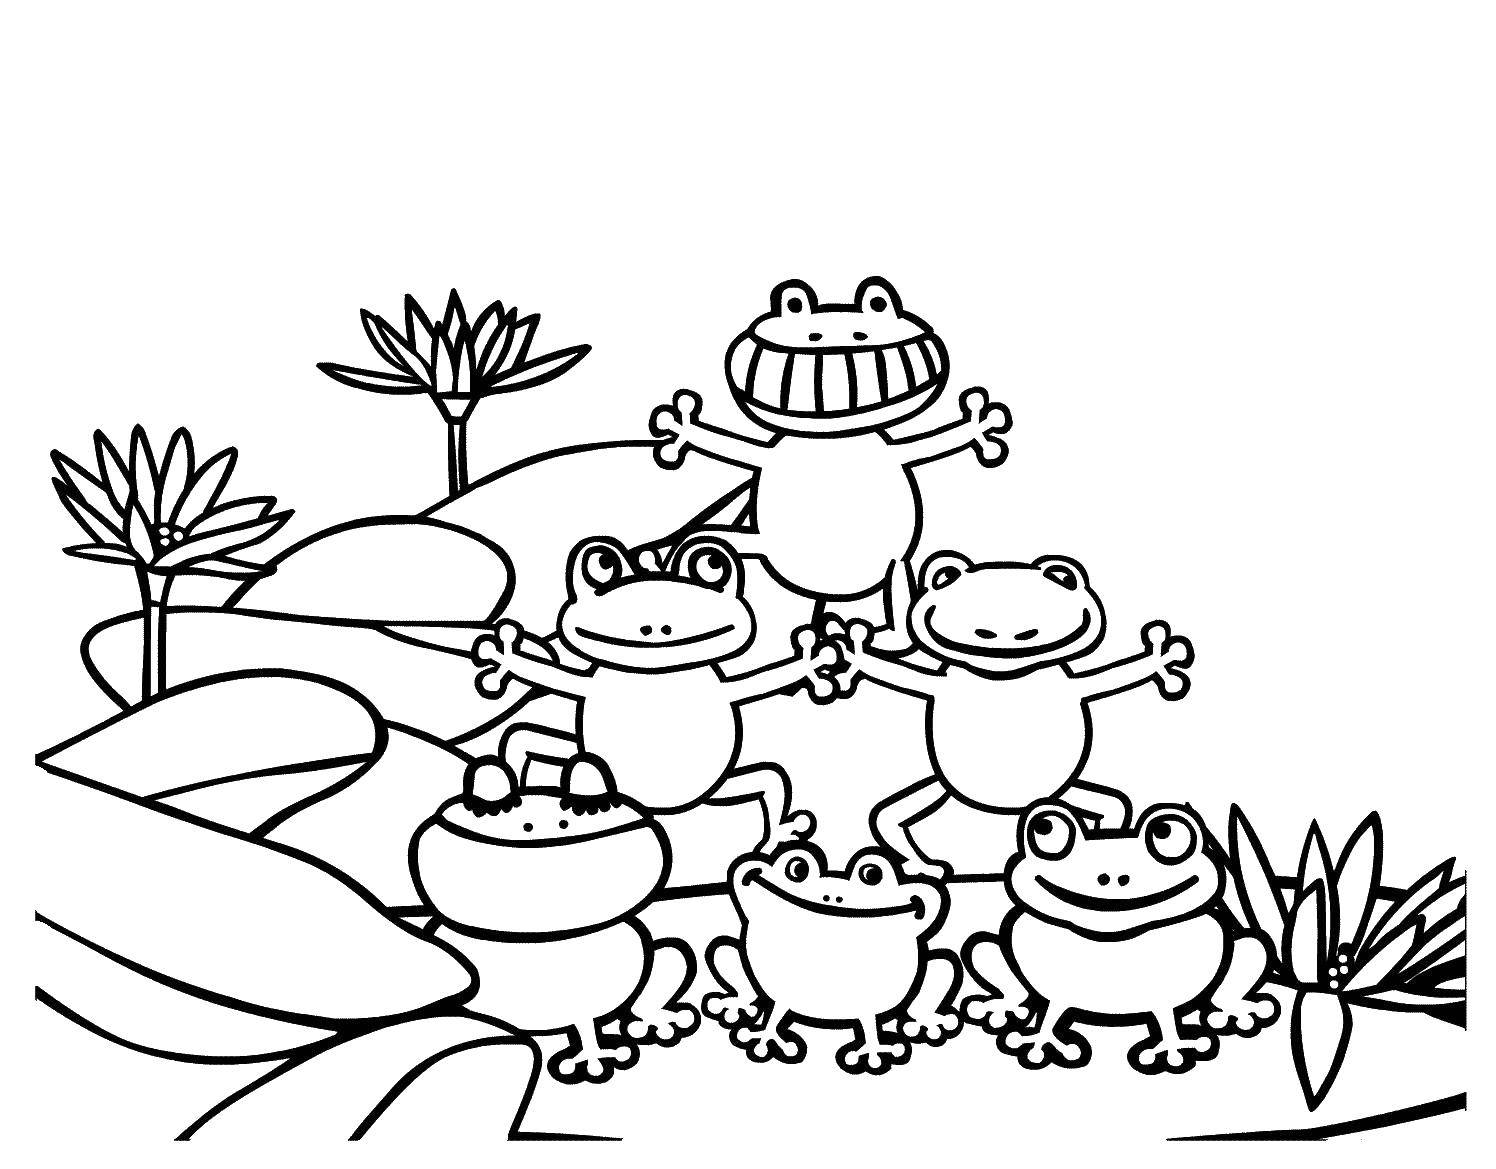 Coloring Frogs in a pond. Category frogs. Tags:  Frogs, pond.